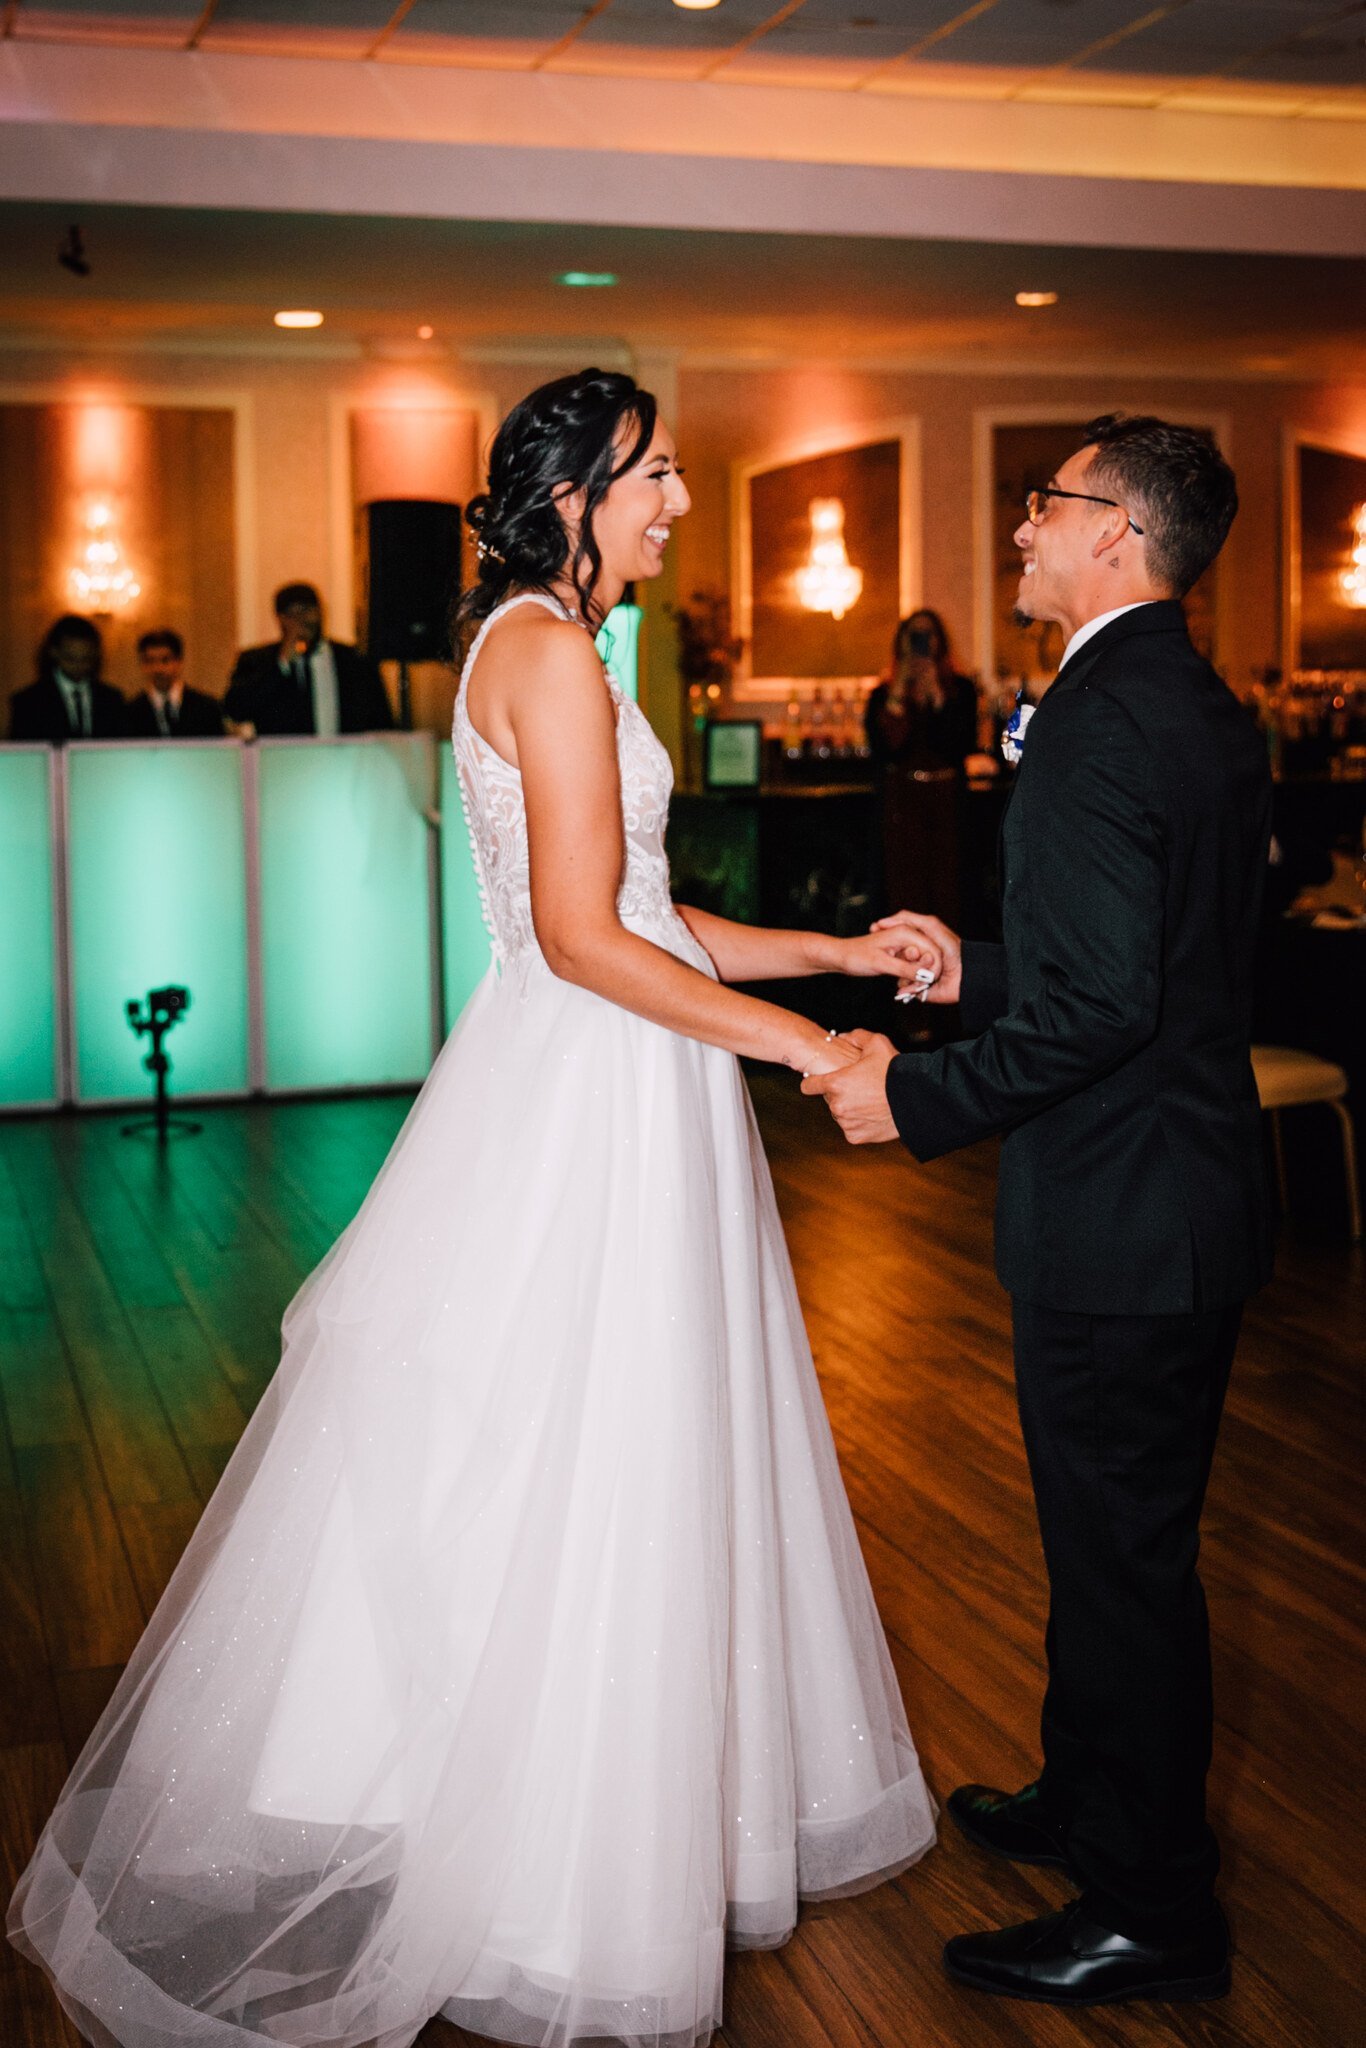  the newlyweds share their first dance during their reception at poughkeepsie grand hotel 